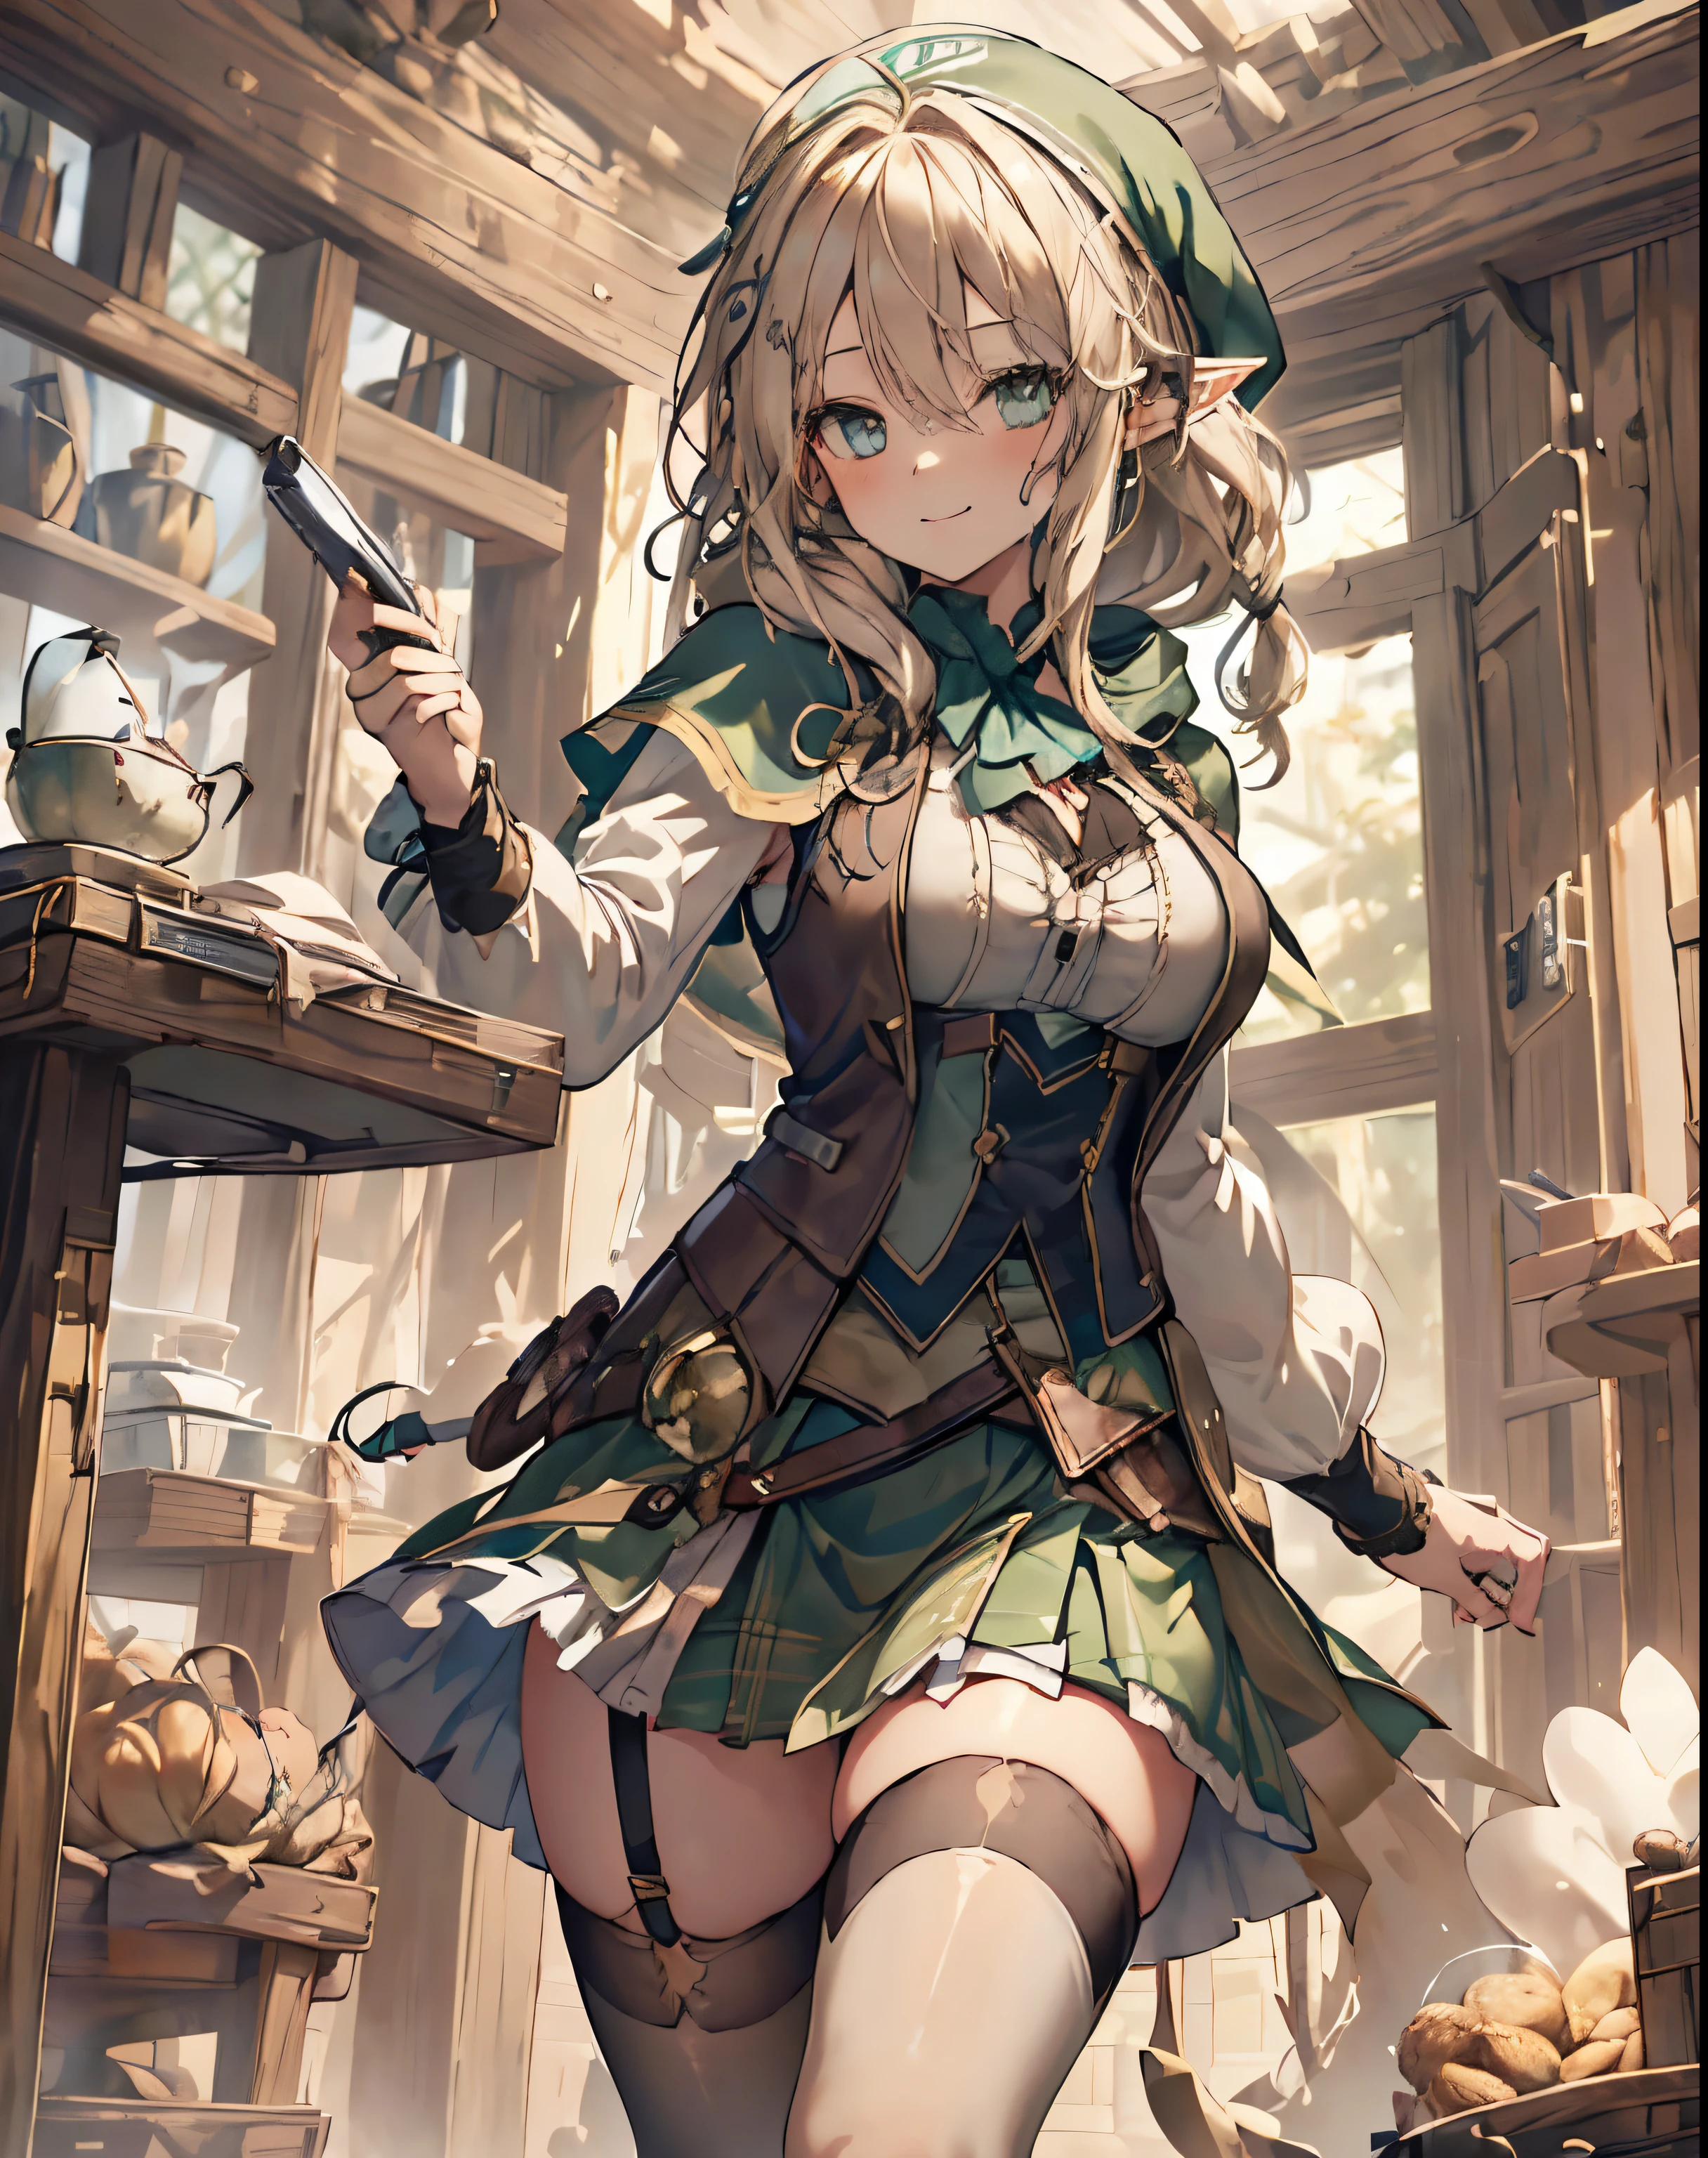 masterpiece, 1girl, sparrow, a blonde haired girl, wearing a white elf clothes, curly medium hair, messy hair, slim body, wearing green capelet with hoody, he close her left eye, shirt ornament, aqua eyes, sho show her back, ahoge, black vest, baby face, big breast, beautiful breasts, rounded breasts, braid hair, mitre cap, long sleeves, beautiful eyes, white stocking, droopy eyes, miniskirt, green skirt, plaid skirt, her age is 19 years old, elf, seductive smile, forest